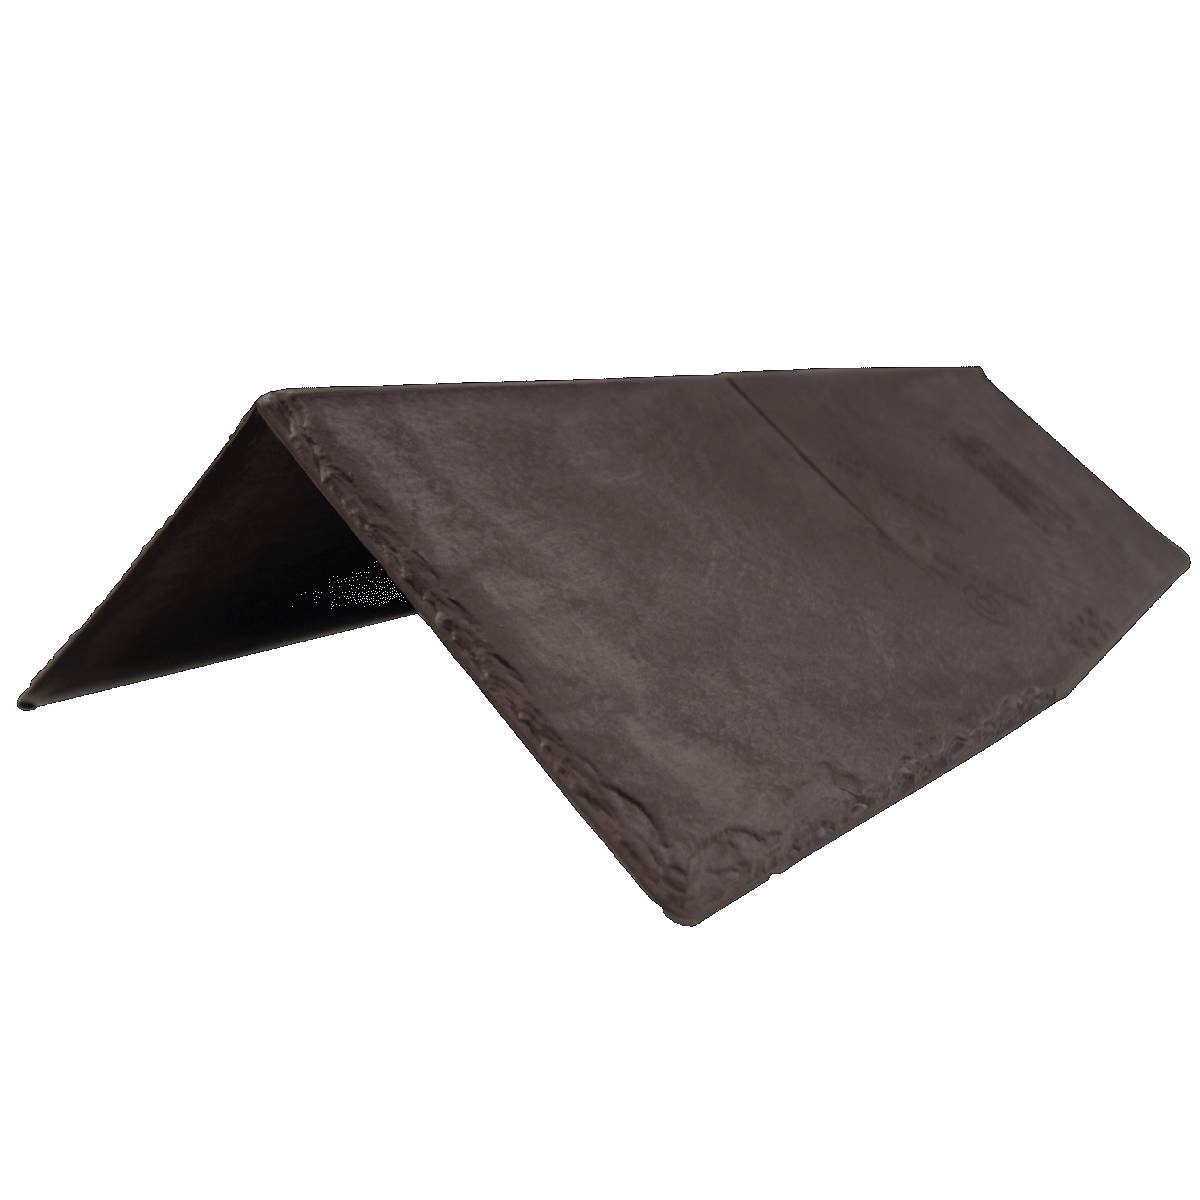 TapcoSlate - Classic Ridge And Hip Cap - Pitched roof ridge and hip cap